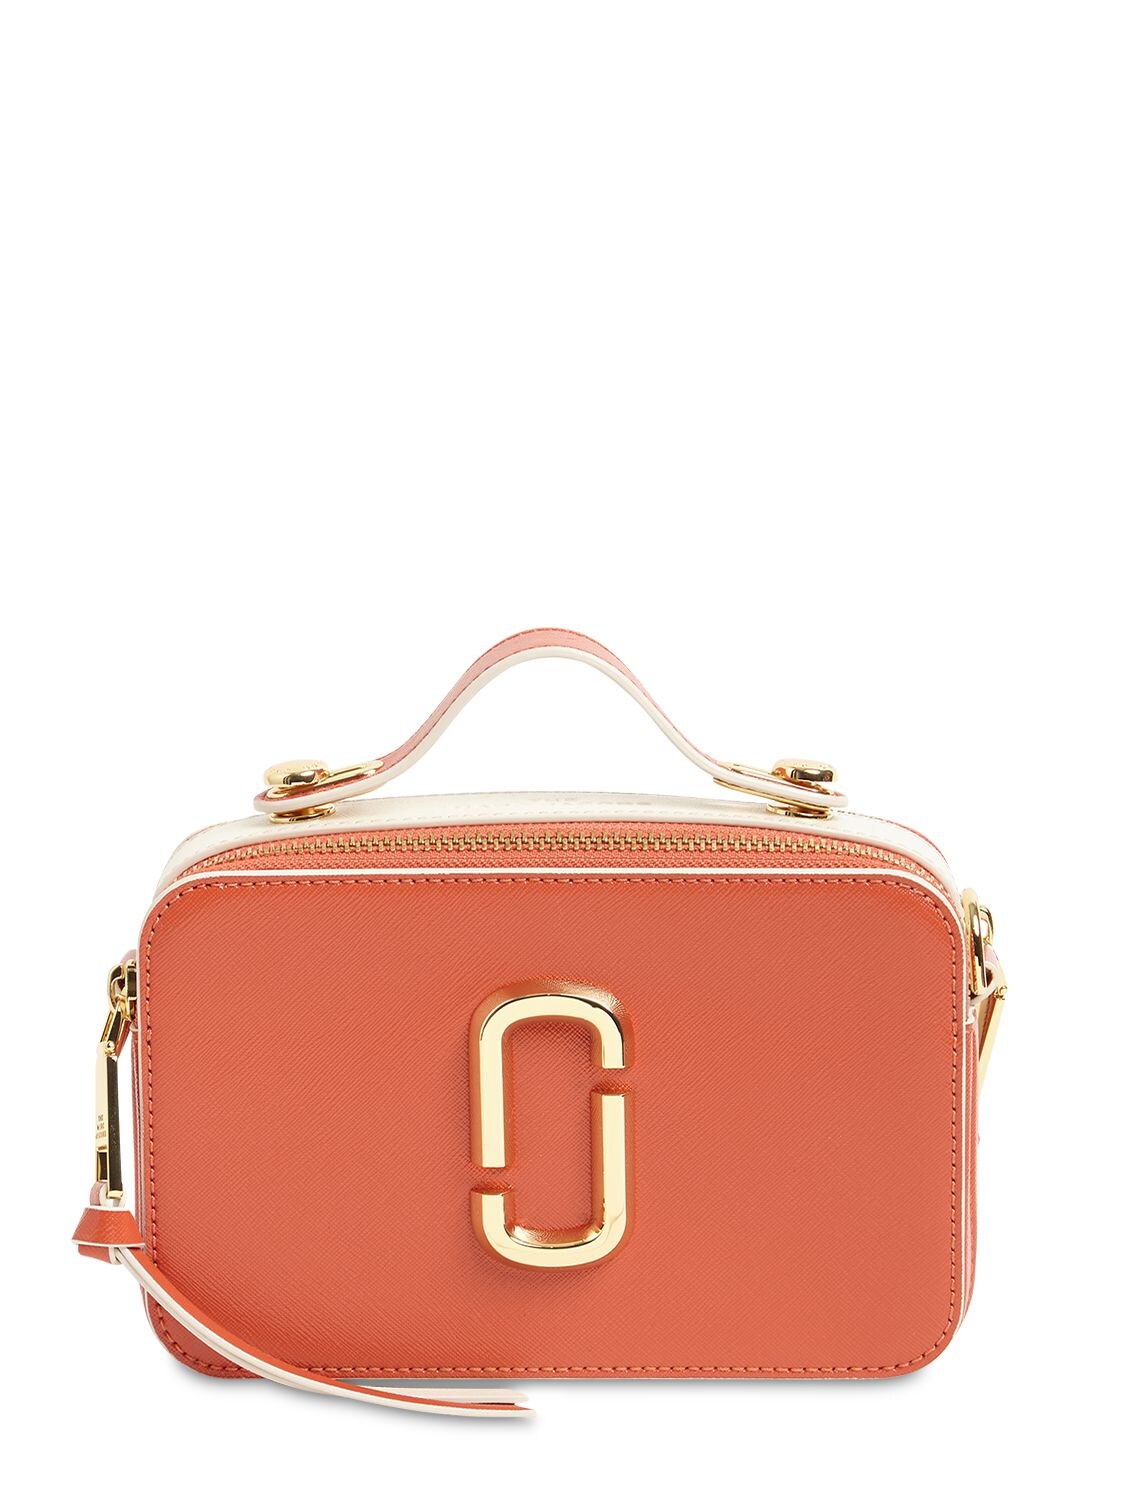 Marc Jacobs Large Snapshot Leather Bag In Peach